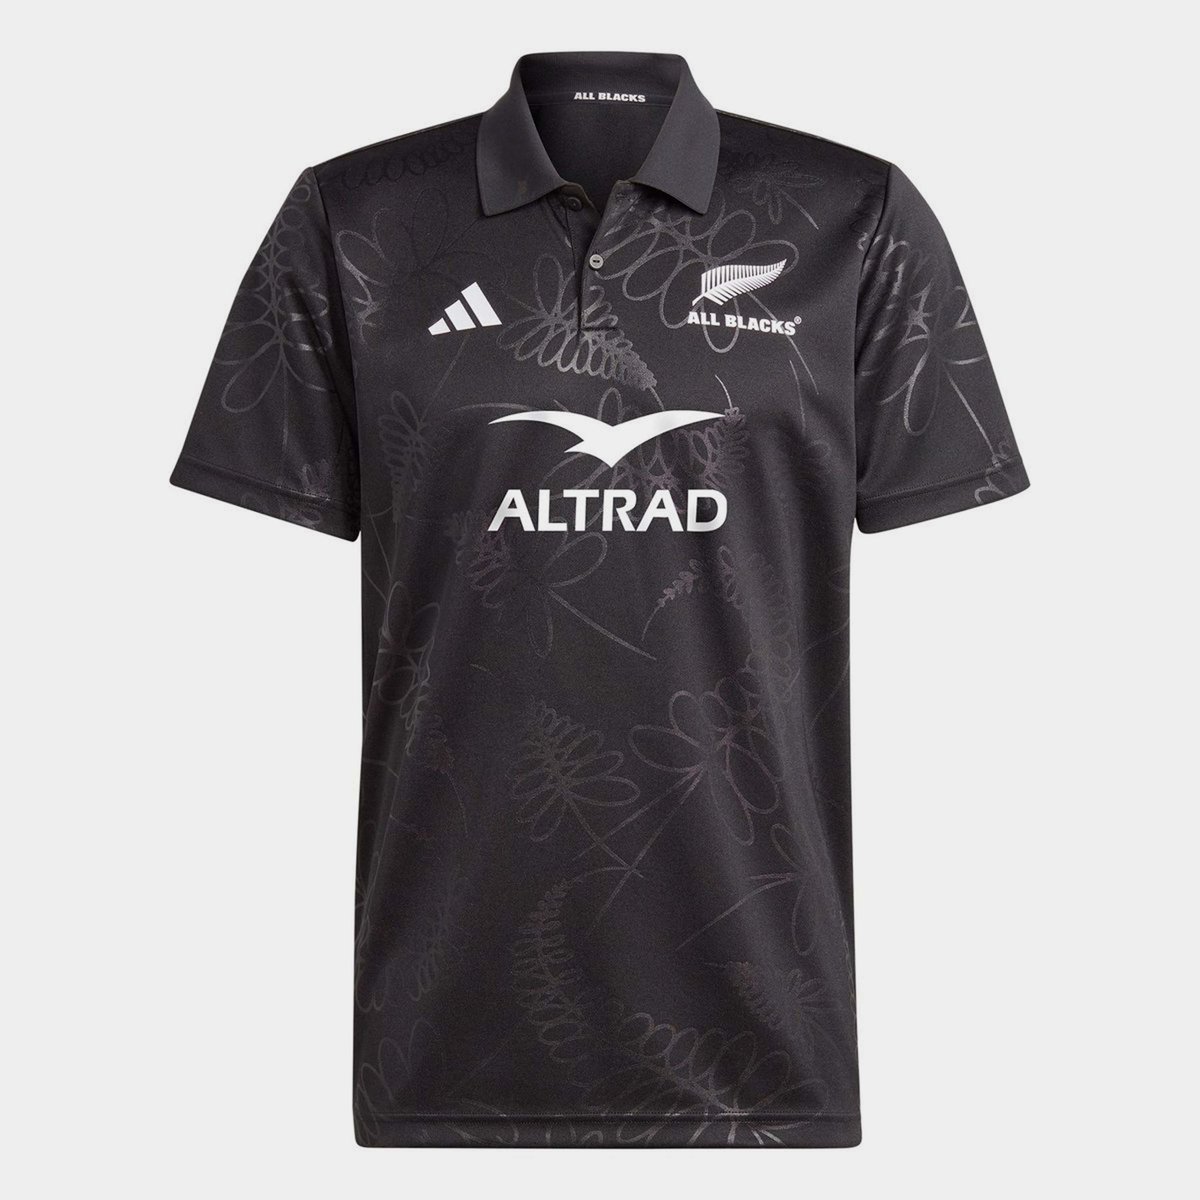 Official All Blacks Rugby Shirts & Kits - Lovell Rugby